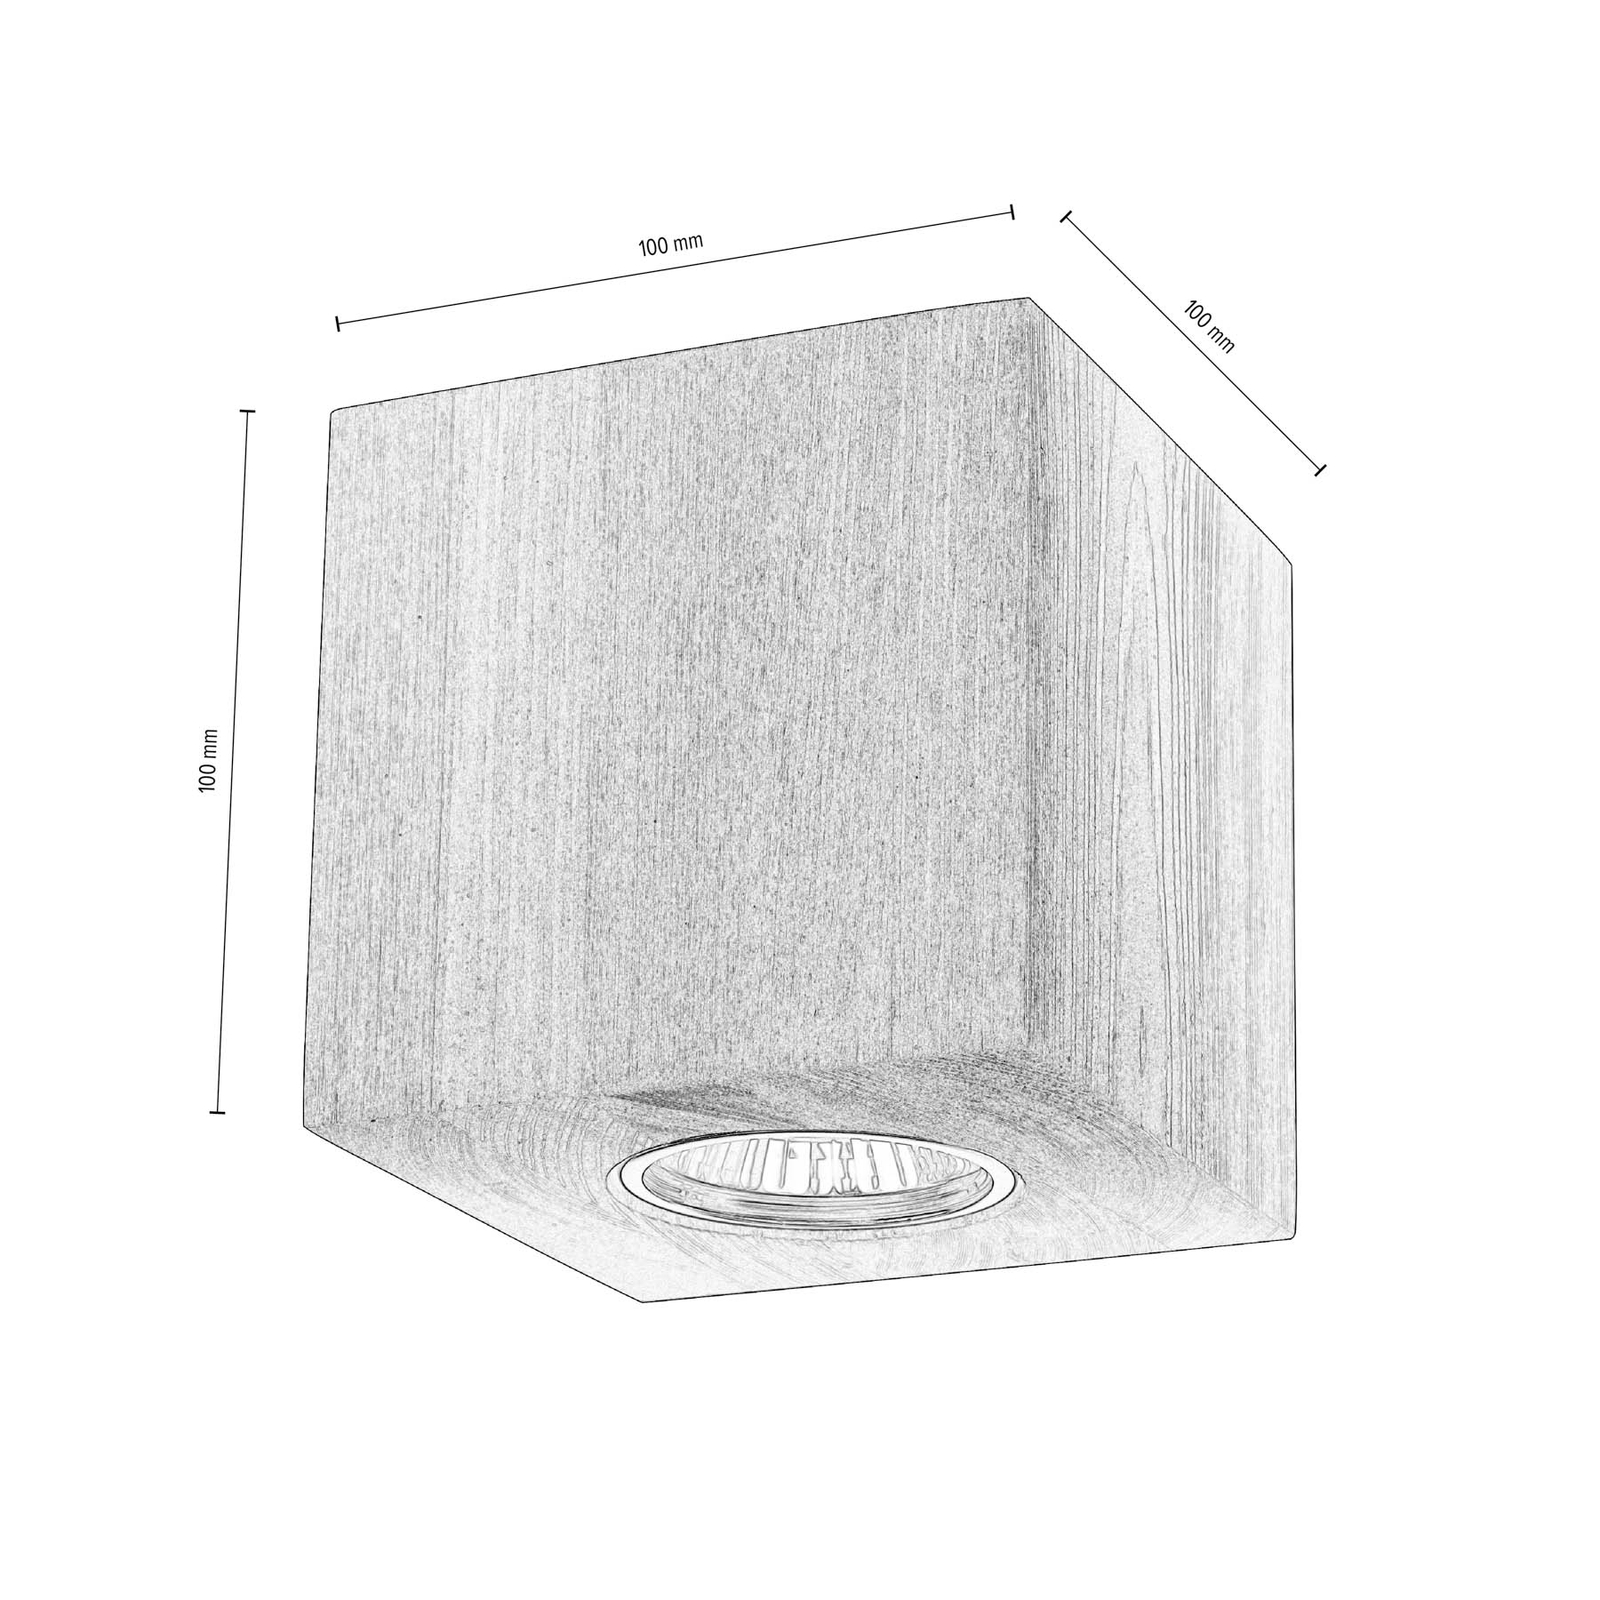 Envostar Tuni downlight, pine stained grey